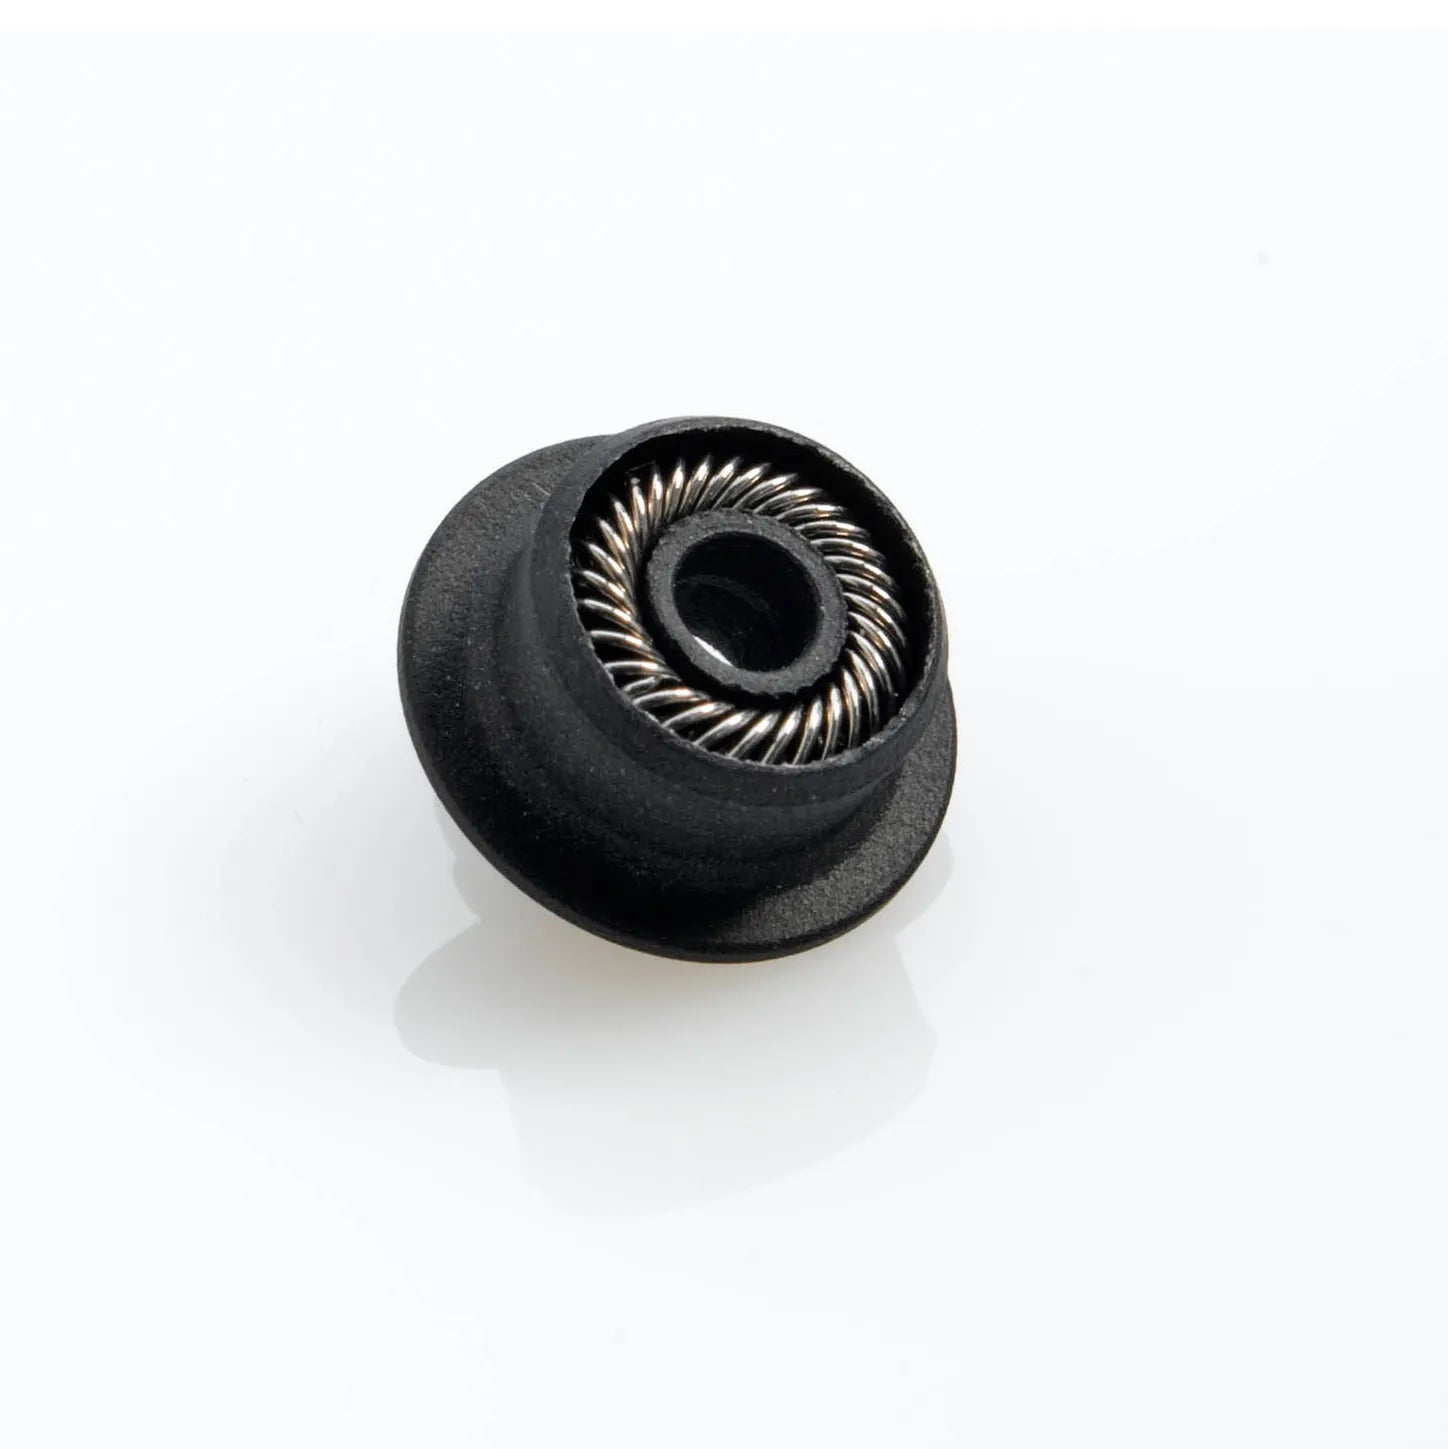 Plunger Seal, Comparable to Shimadzu # 228-35145-00, 4425339(Sciex™)